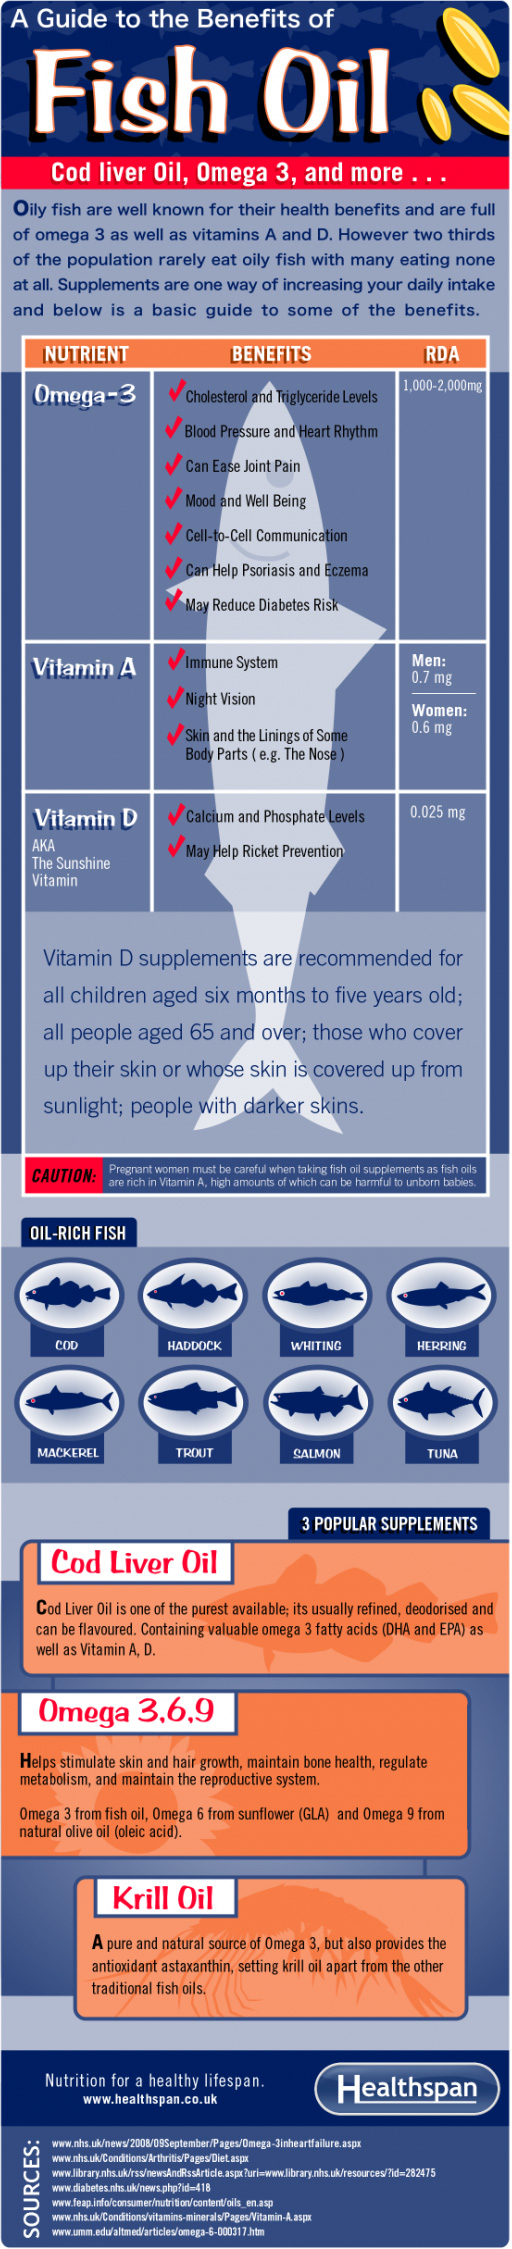 The-Benefits-of-Fish-Oil-Infographic1